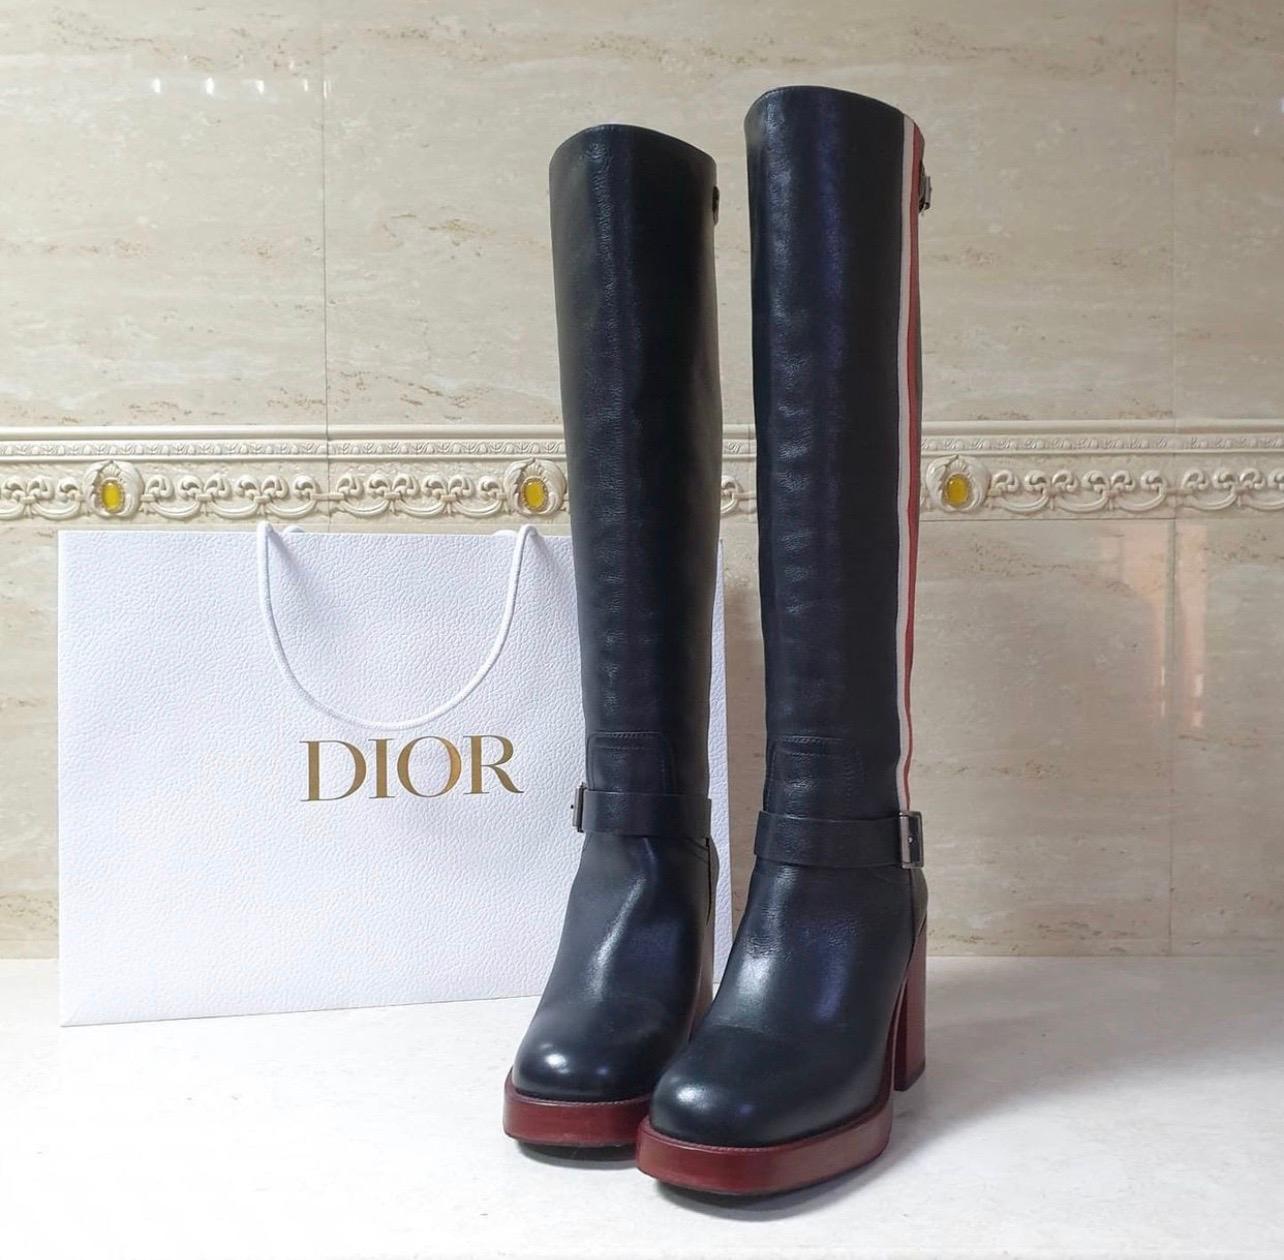 Black leather Christian Dior tall pull-on boots that features red and white leather racing stripe accent, silver tone buckle fastening, round toe, red stacked block heel and rubber protective sole. 
Sz.37.5
Very good condition
No original packaging.
